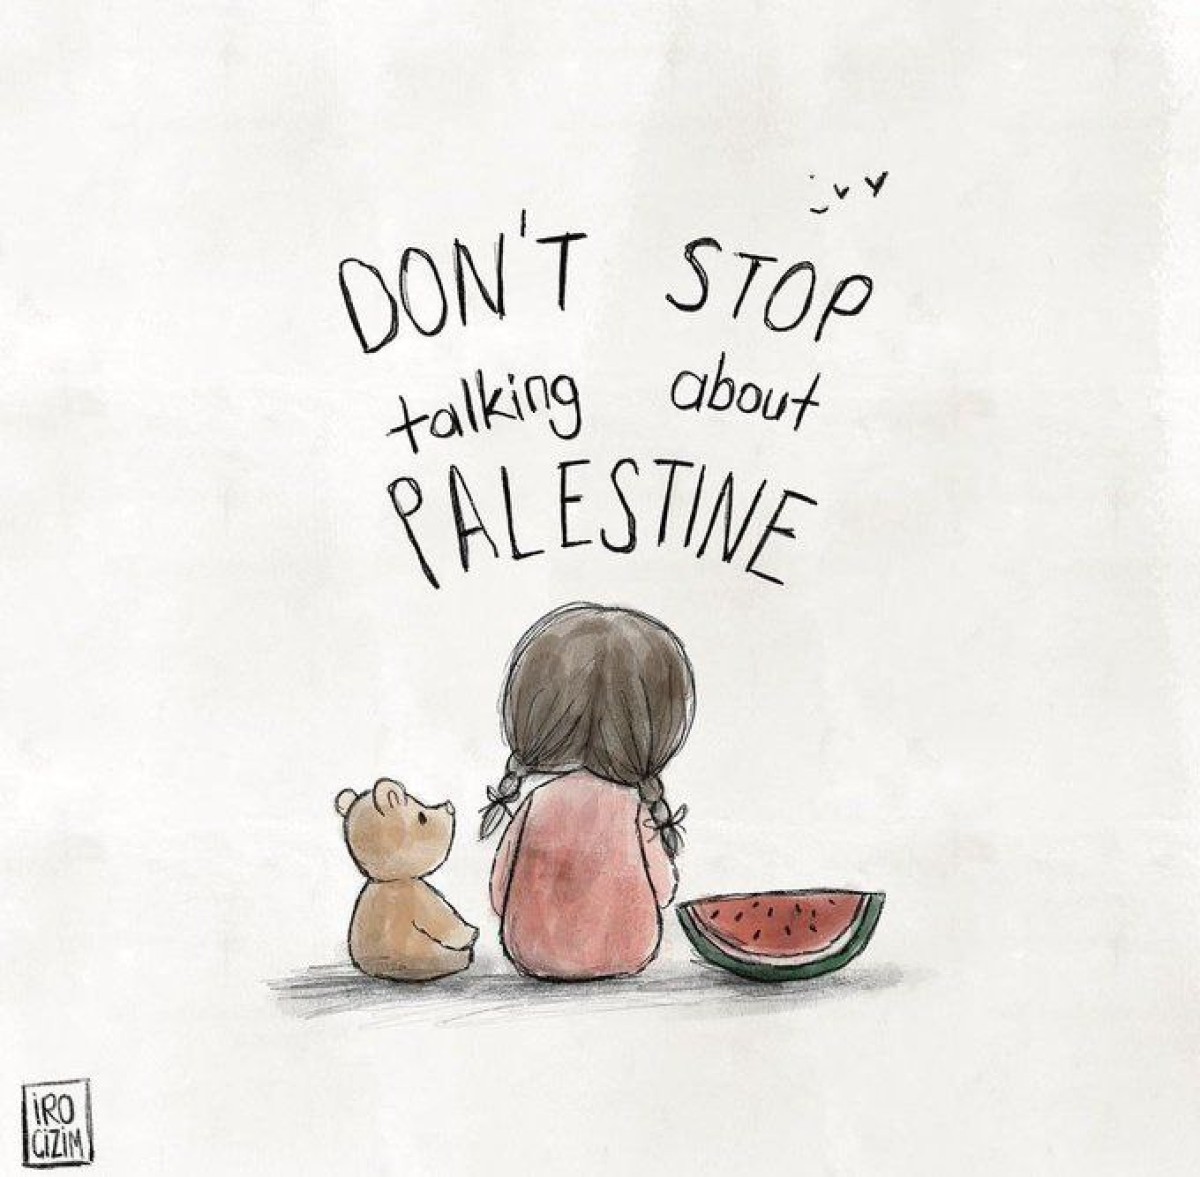 DON'T STOP talking about PALESTINE